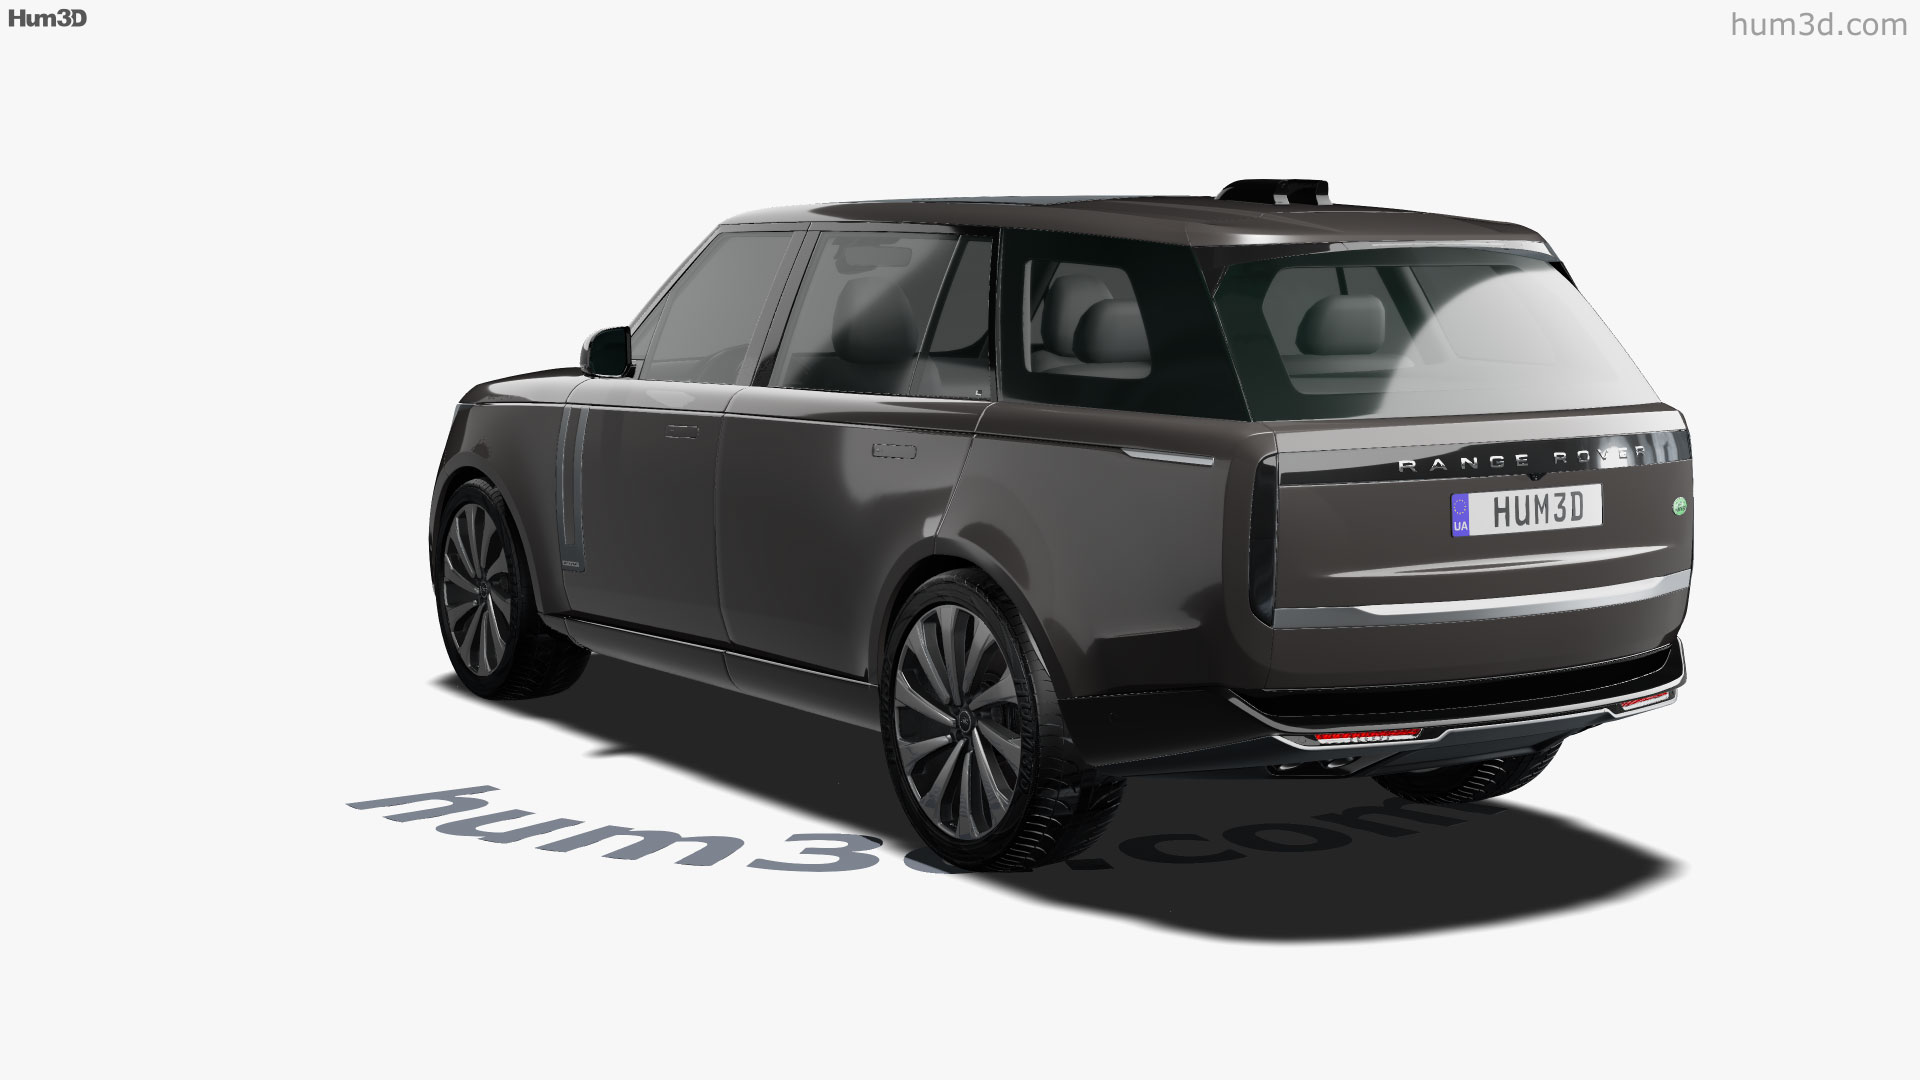 360 view of Land Rover Range Rover LWB Autobiography 2022 3D model - Hum3D  store